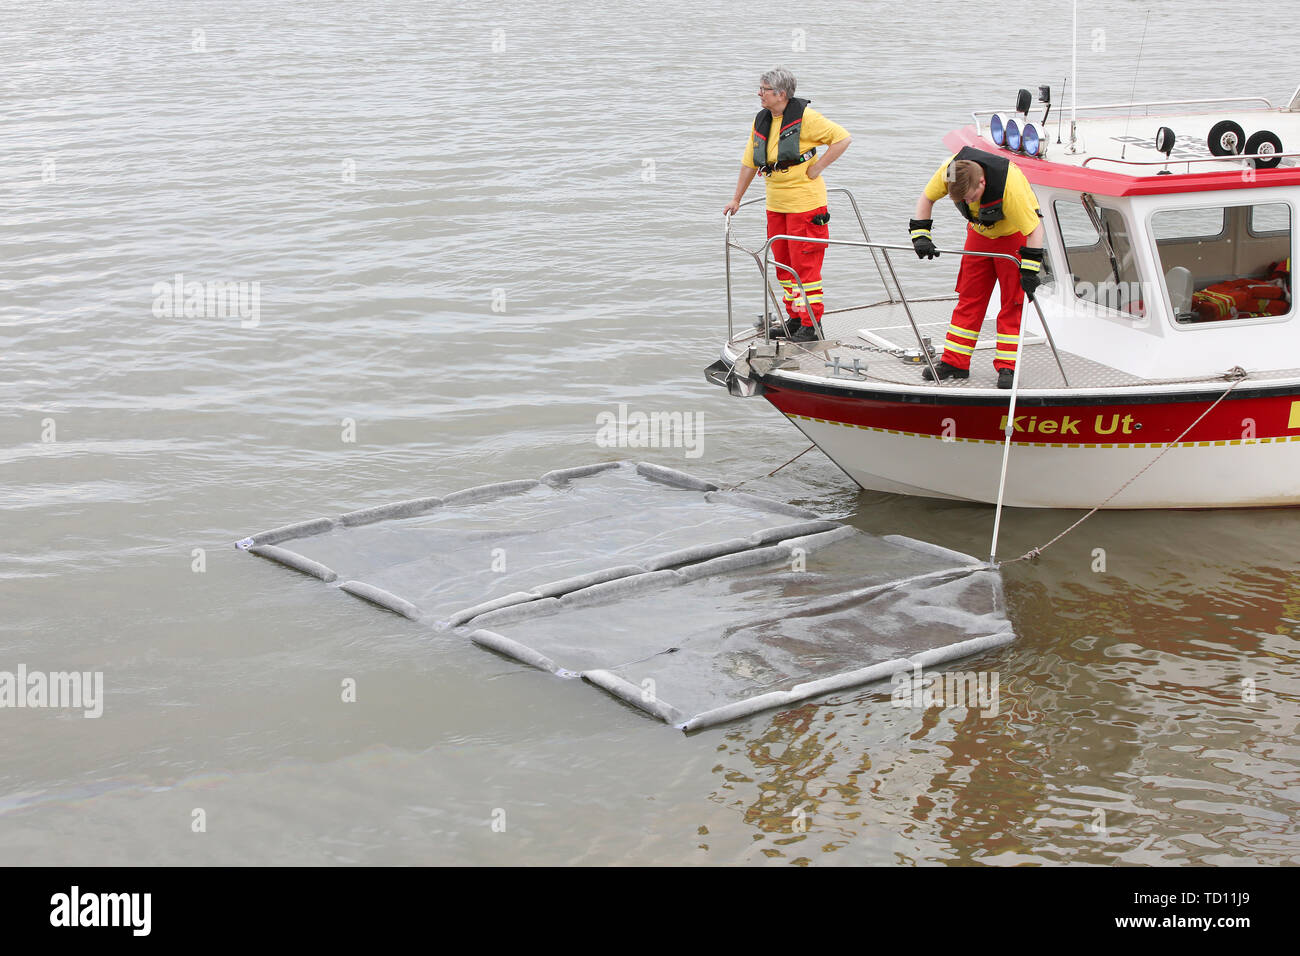 Stadersand, Germany. 11th June, 2019. DLRG emergency forces pick up oil from the surface of the Elbe. Operating materials had leaked from the hull of the sunken sailing ship 'No 5 Elbe' in the port of Stadersand, and the fire brigade was on site with the support of the German Federal Agency for Technical Relief and the German Aerospace Center (DLRG). The historic sailing ship, which has only recently been extensively renovated, collided with a container ship on the Elbe and sank. Credit: Bodo Marks/dpa/Alamy Live News Stock Photo